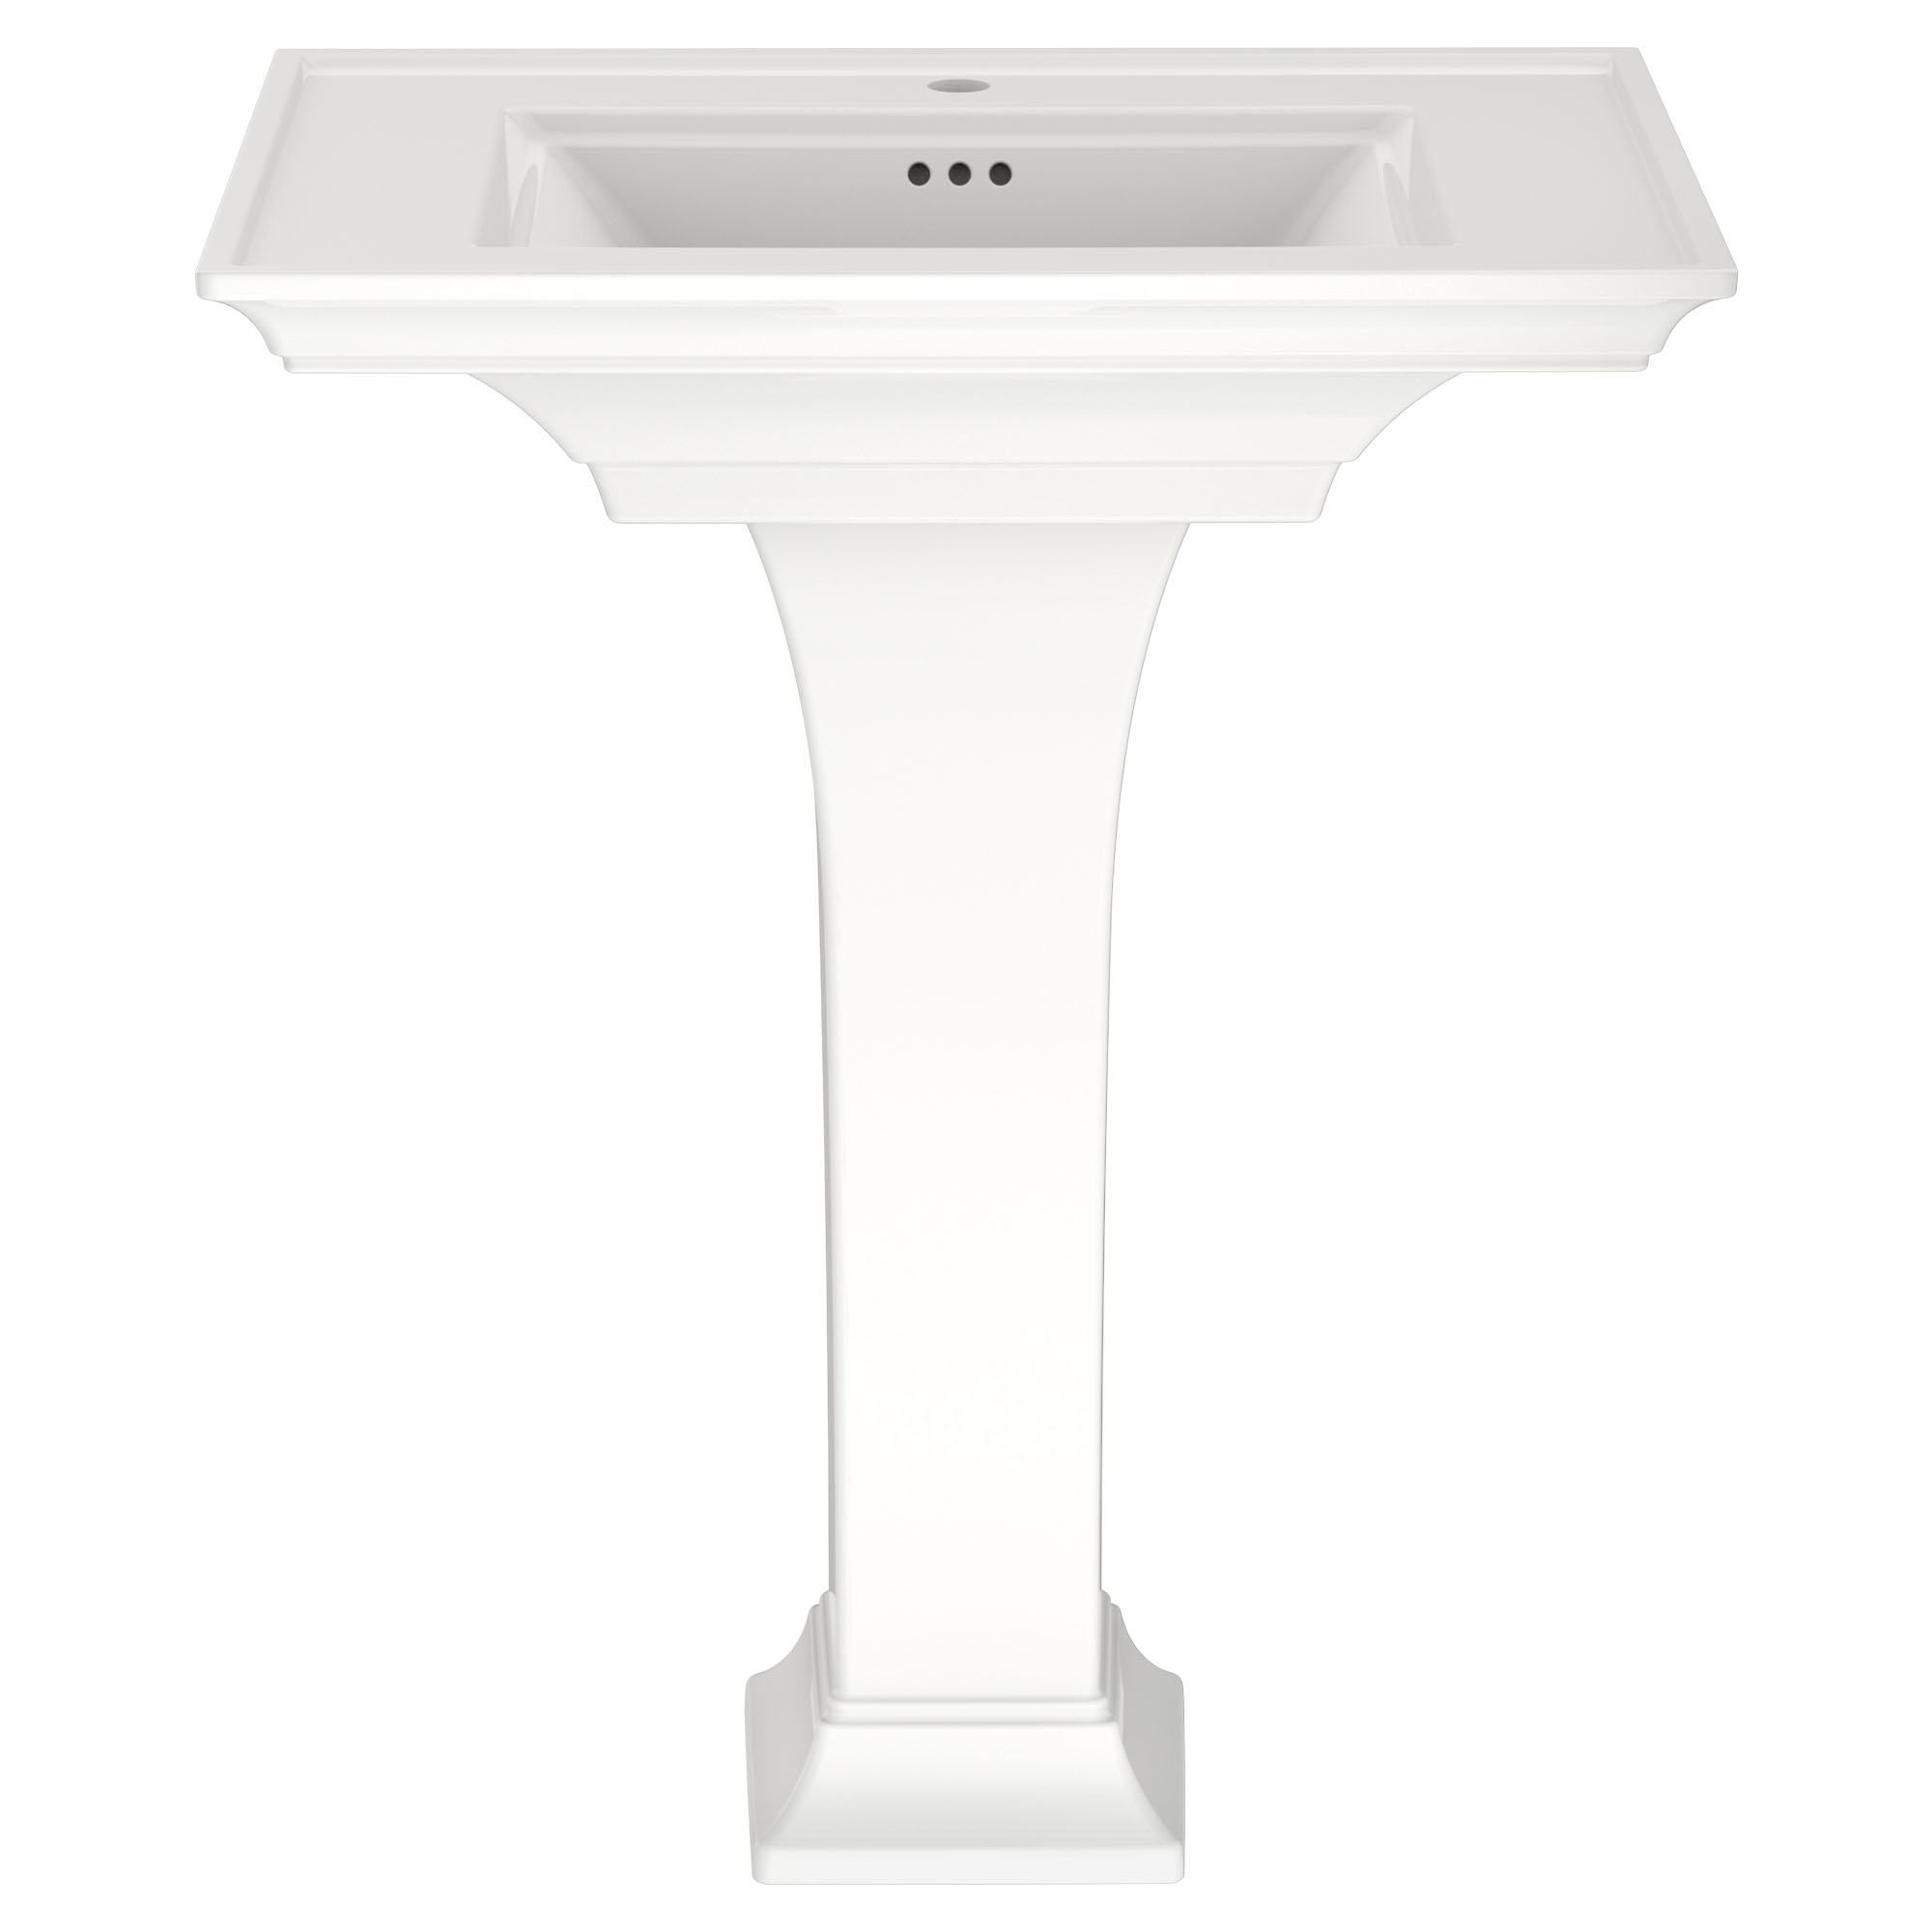 Town Square® S Center Hole Only Pedestal Sink Top and Leg Combination